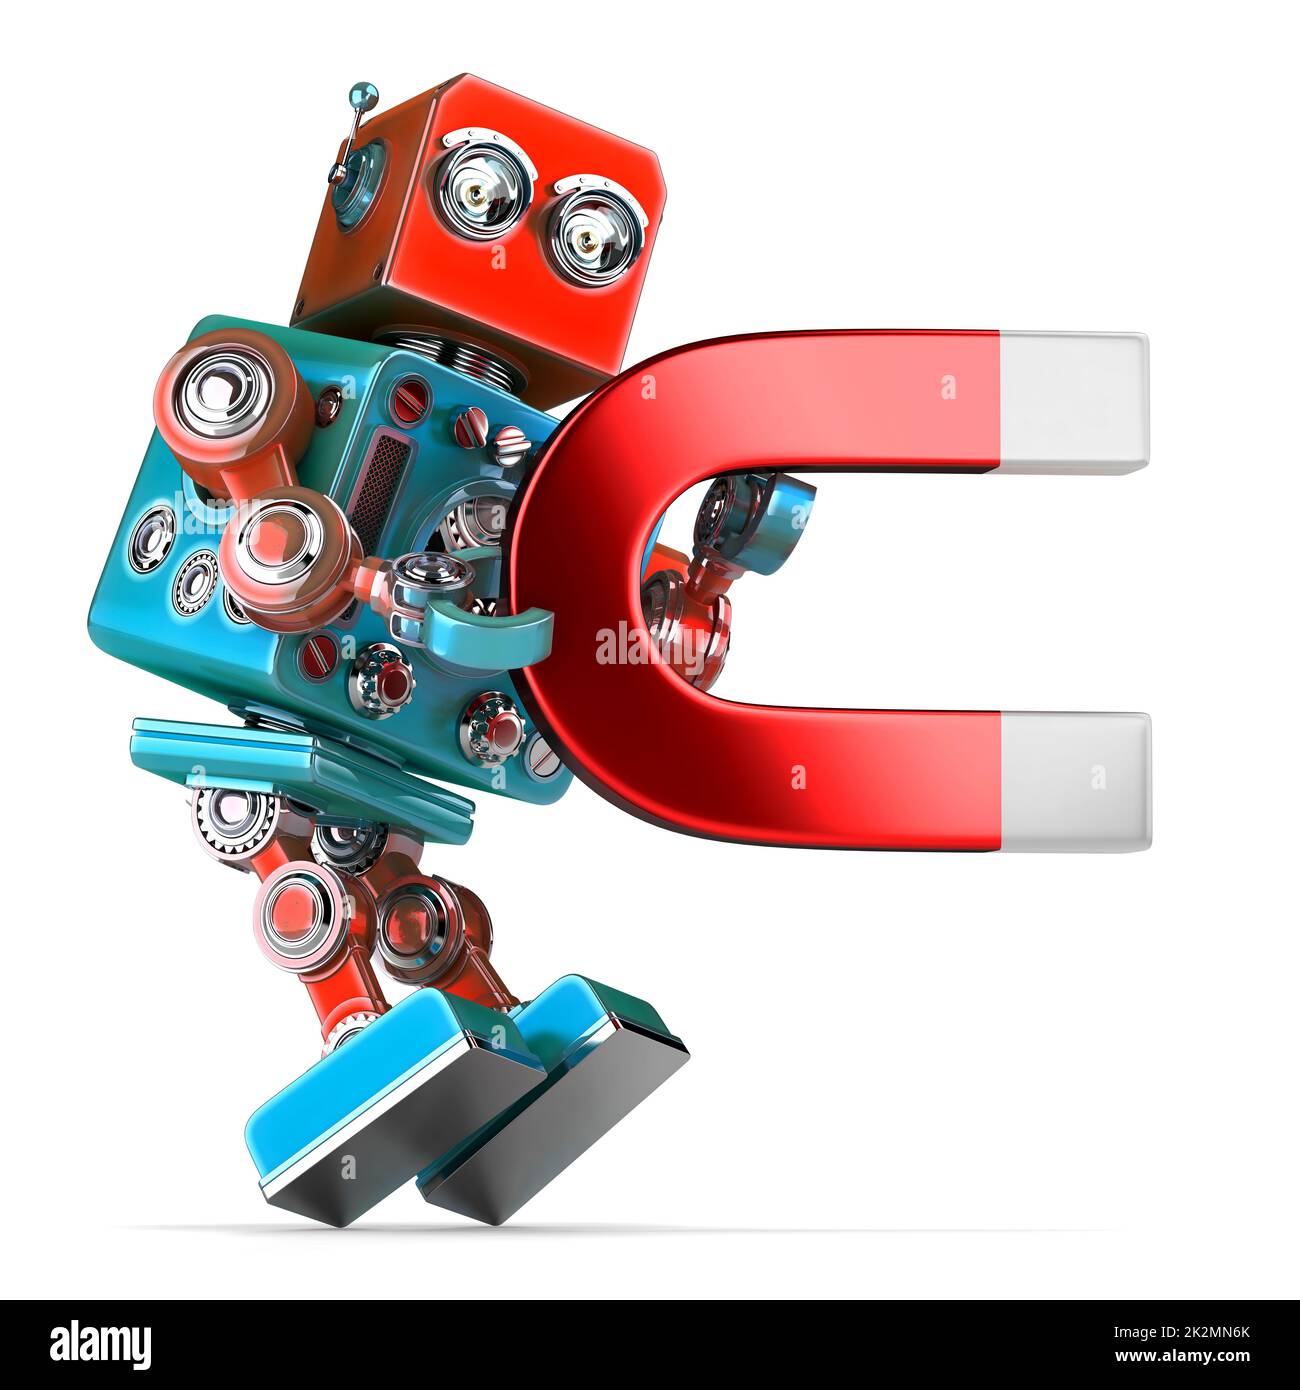 Retro robot holding a big magnet. 3D illustration. Isolated. Contains clipping path Stock Photo